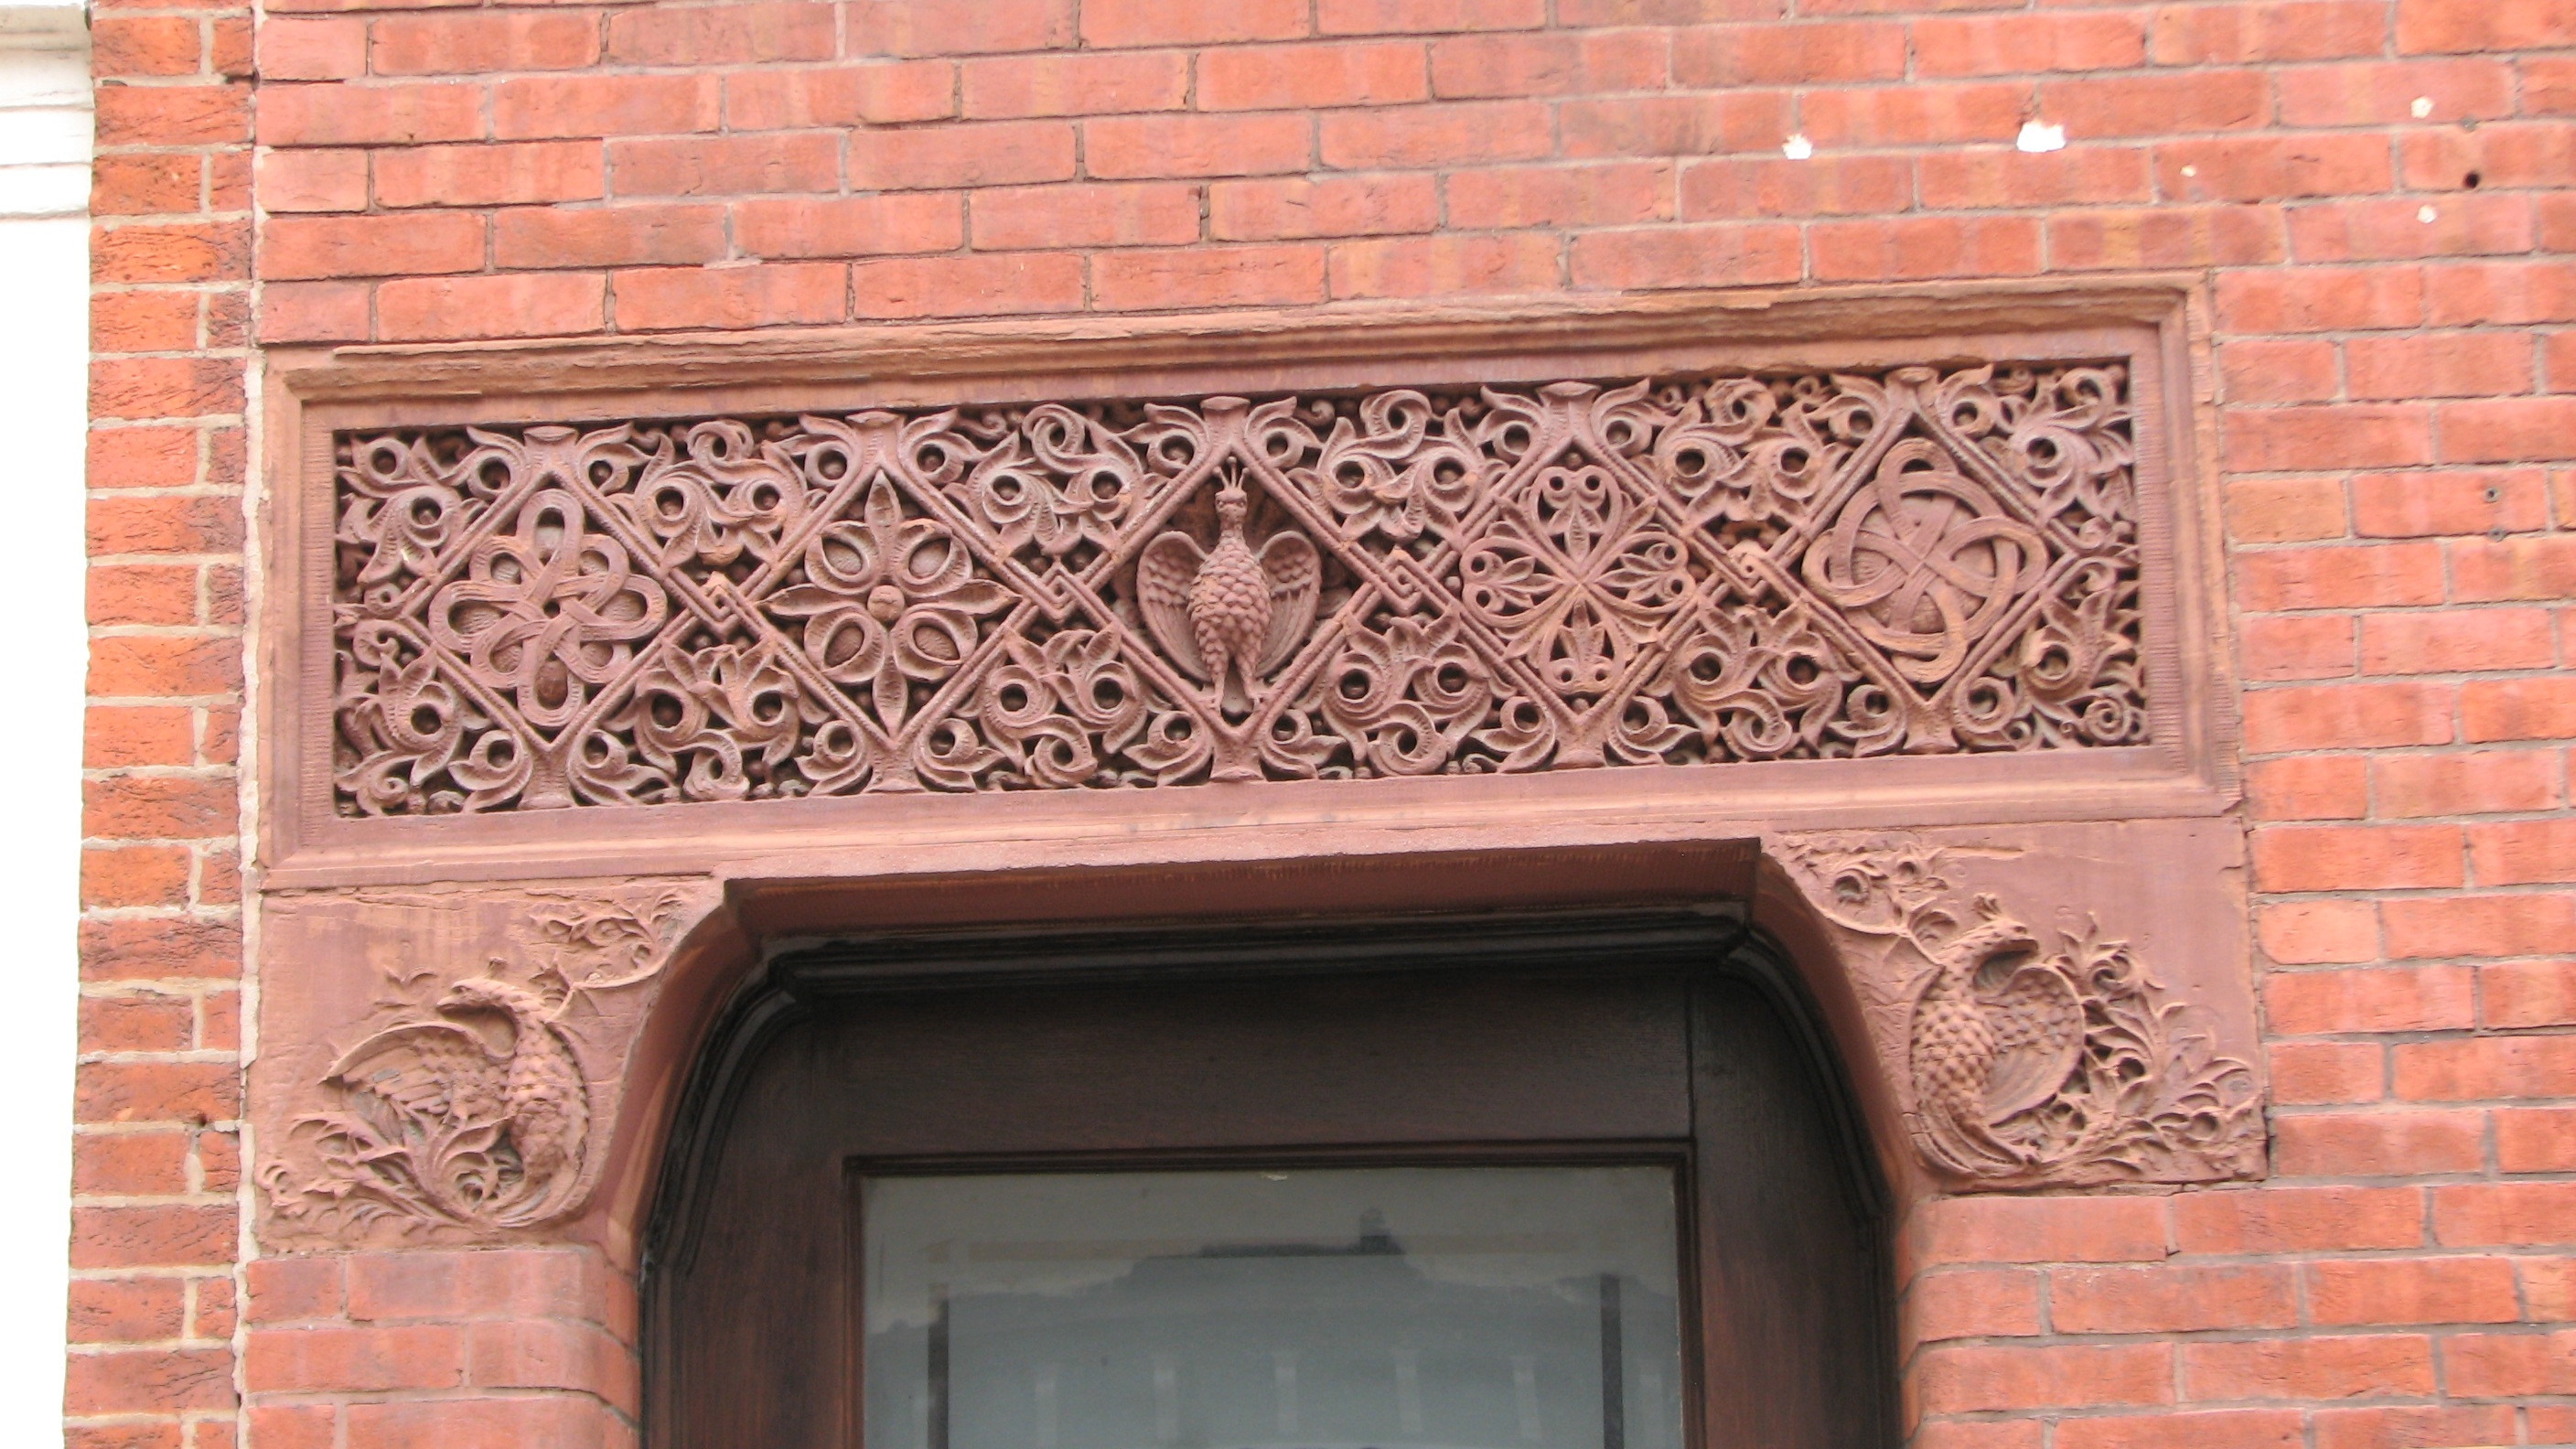 Terra cotta carvings adorn the entrance to the Etting Residence.